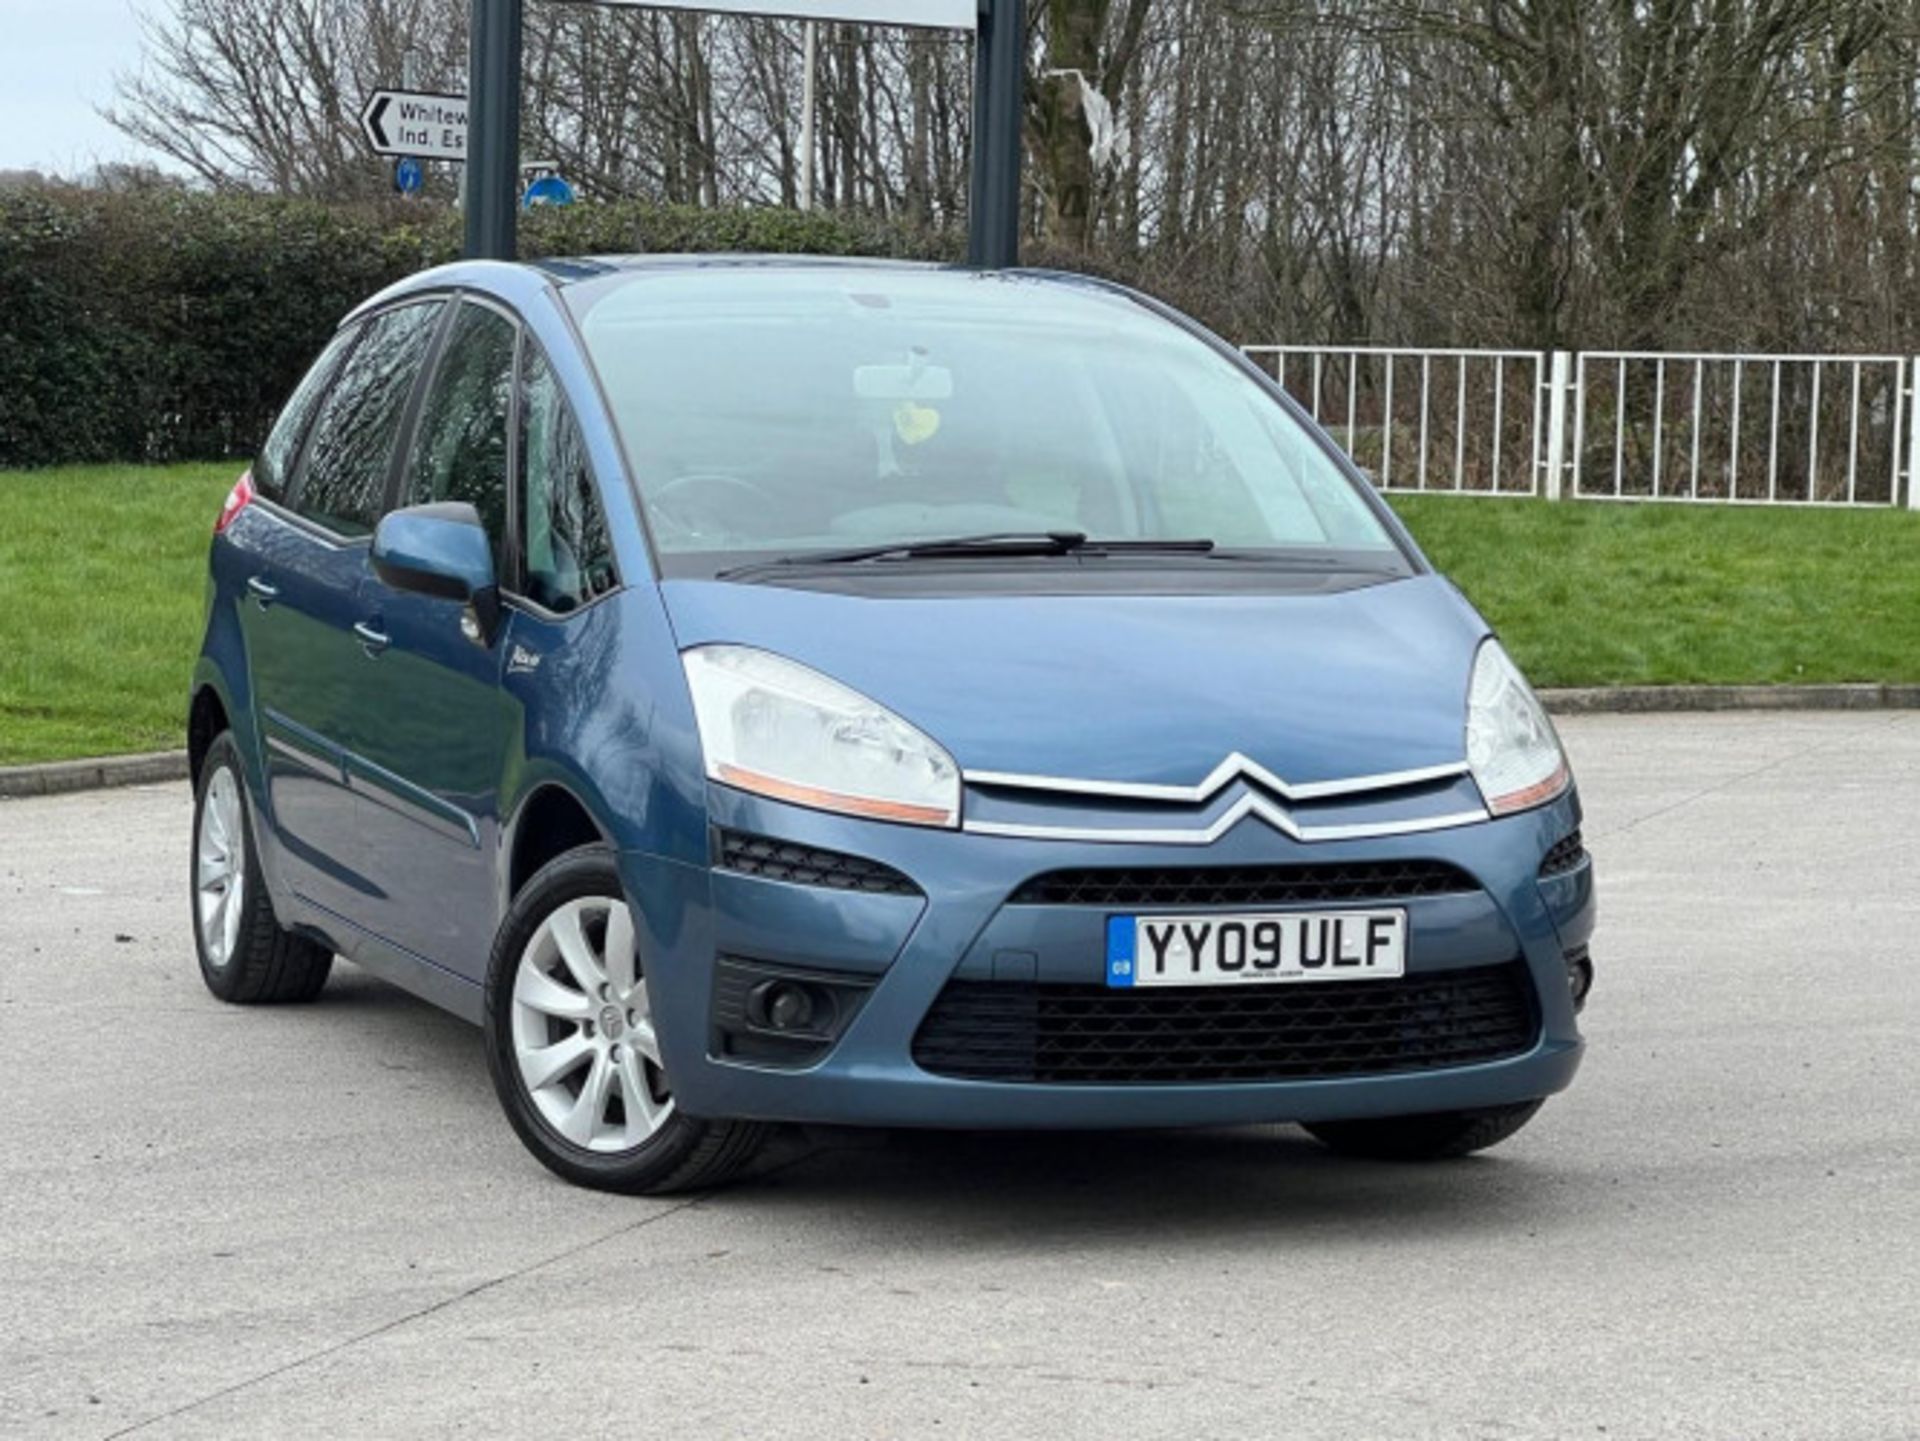 2009 CITROEN C4 PICASSO 1.6 HDI VTR+ EGS6 5DR >>--NO VAT ON HAMMER--<< - Image 114 of 123